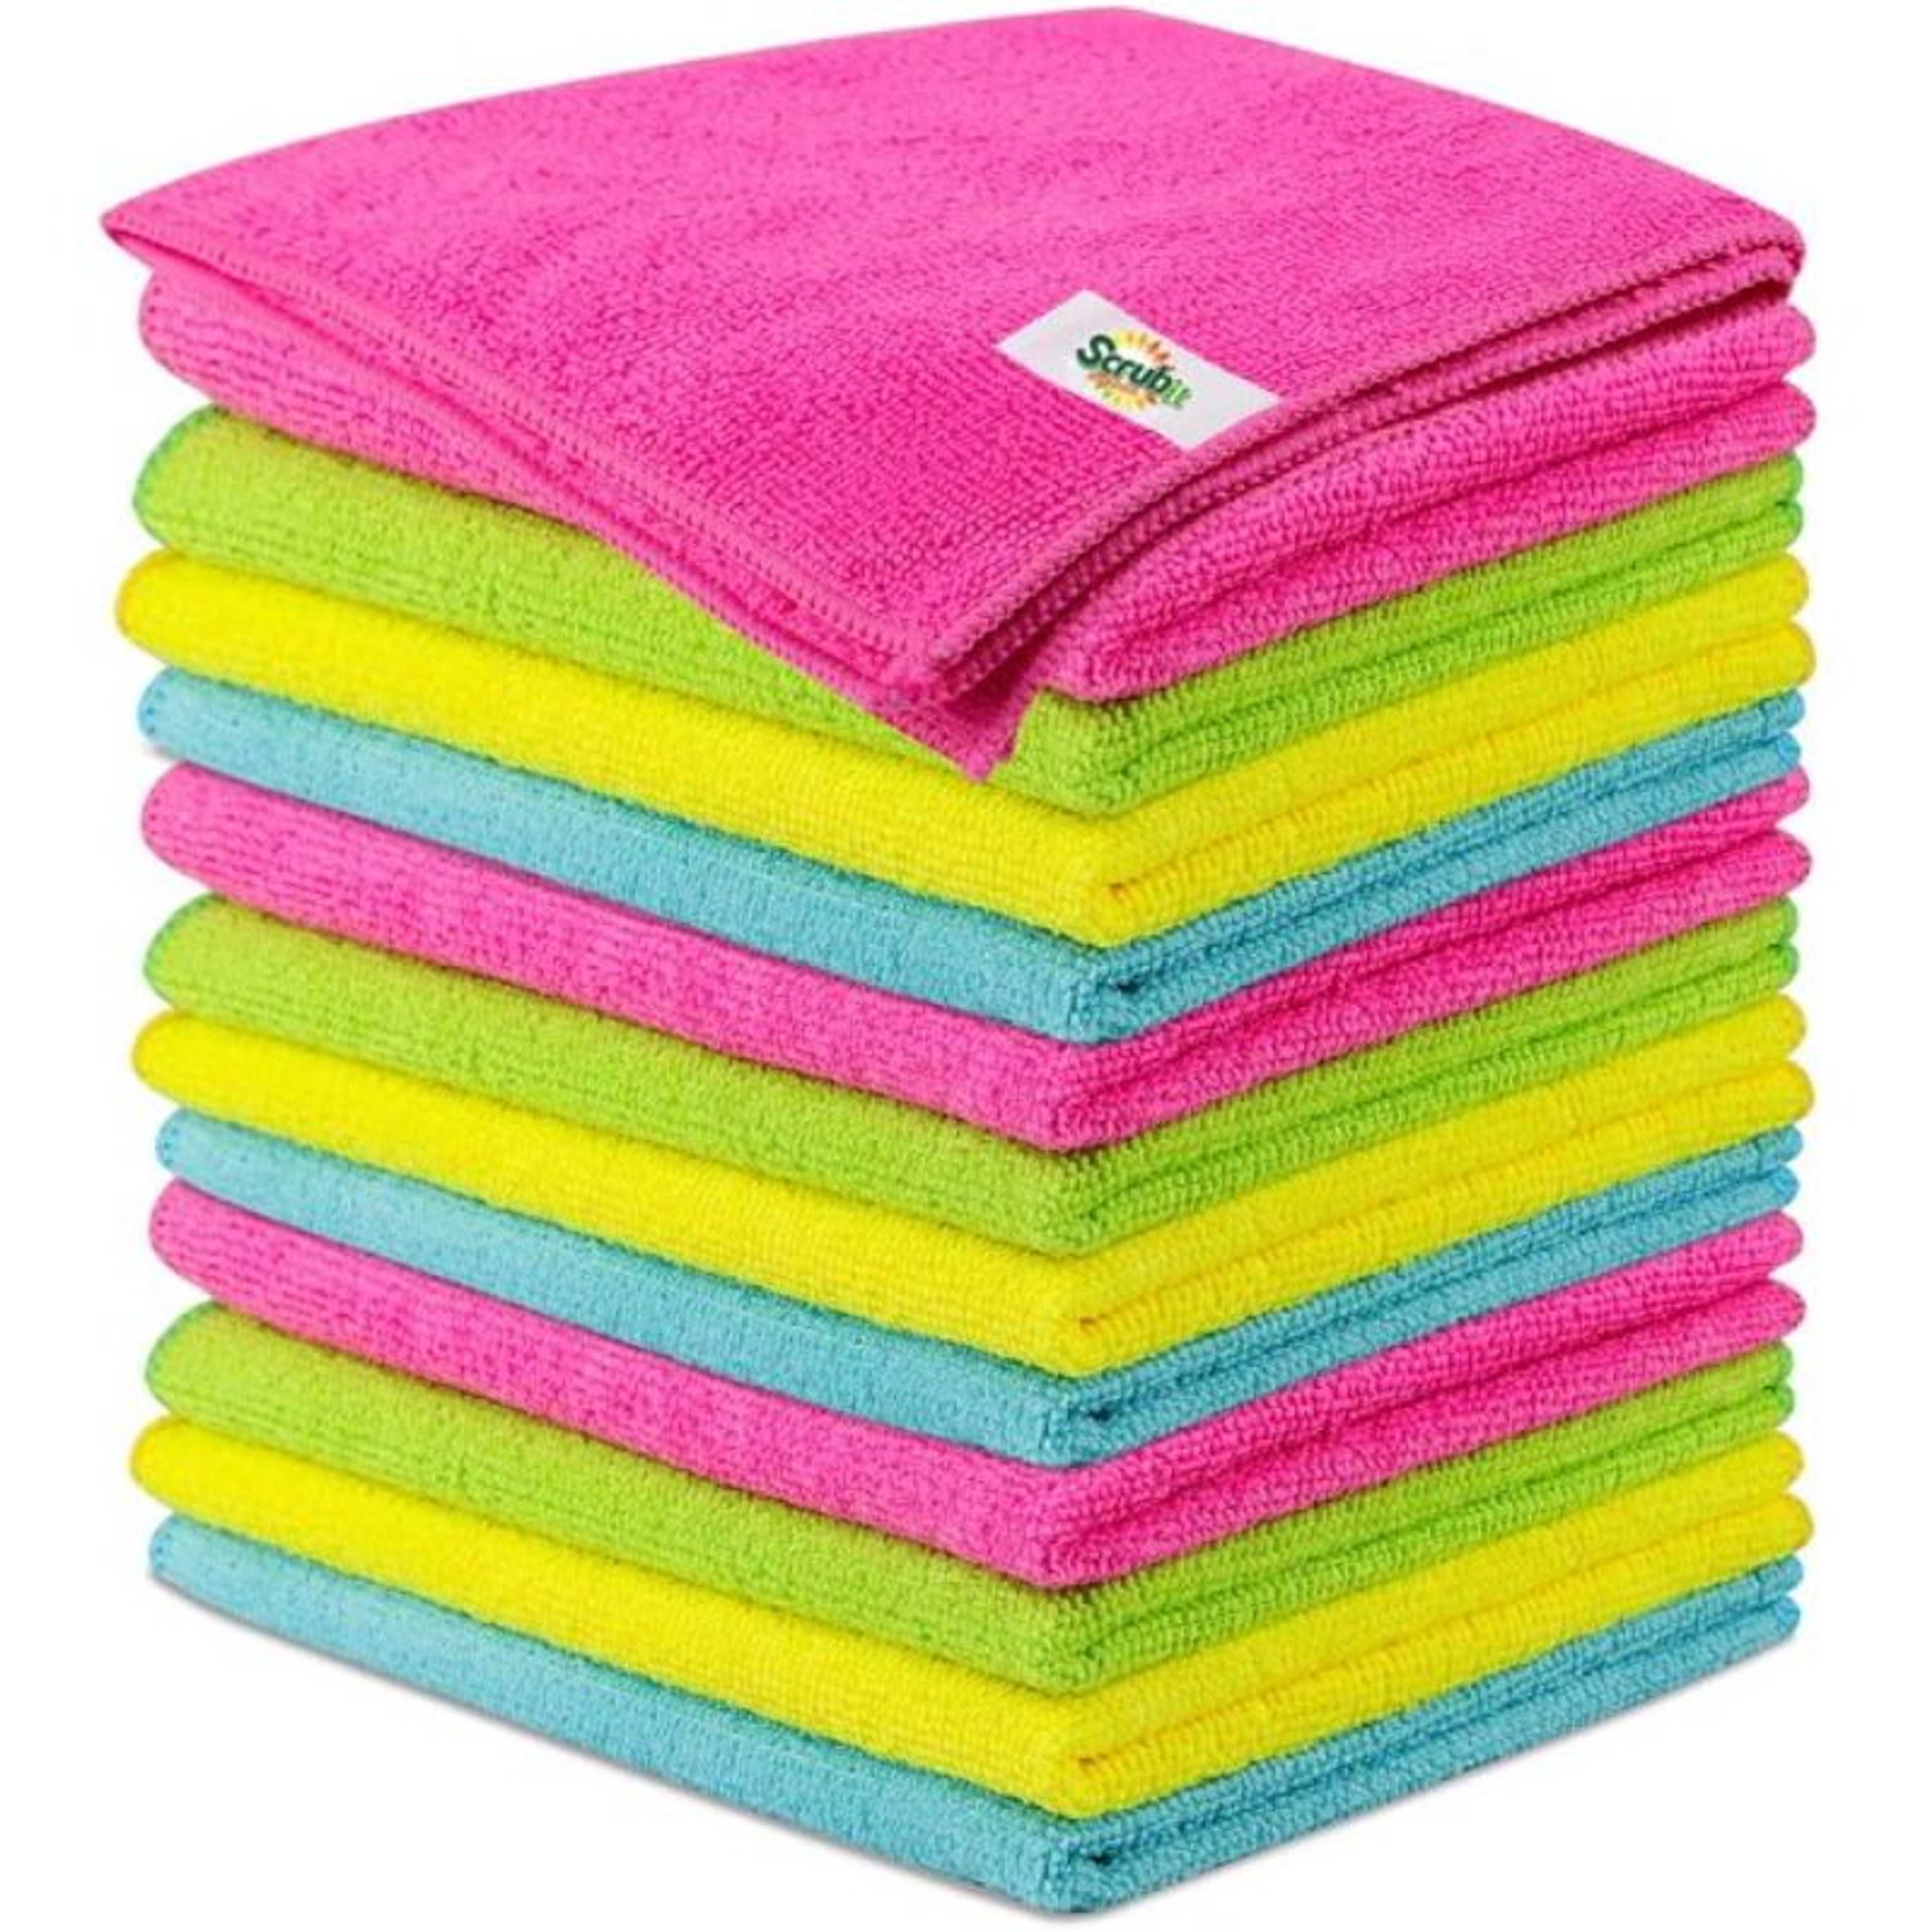 Pack of 5 – Soft Microfiber Car Cleaning Towel